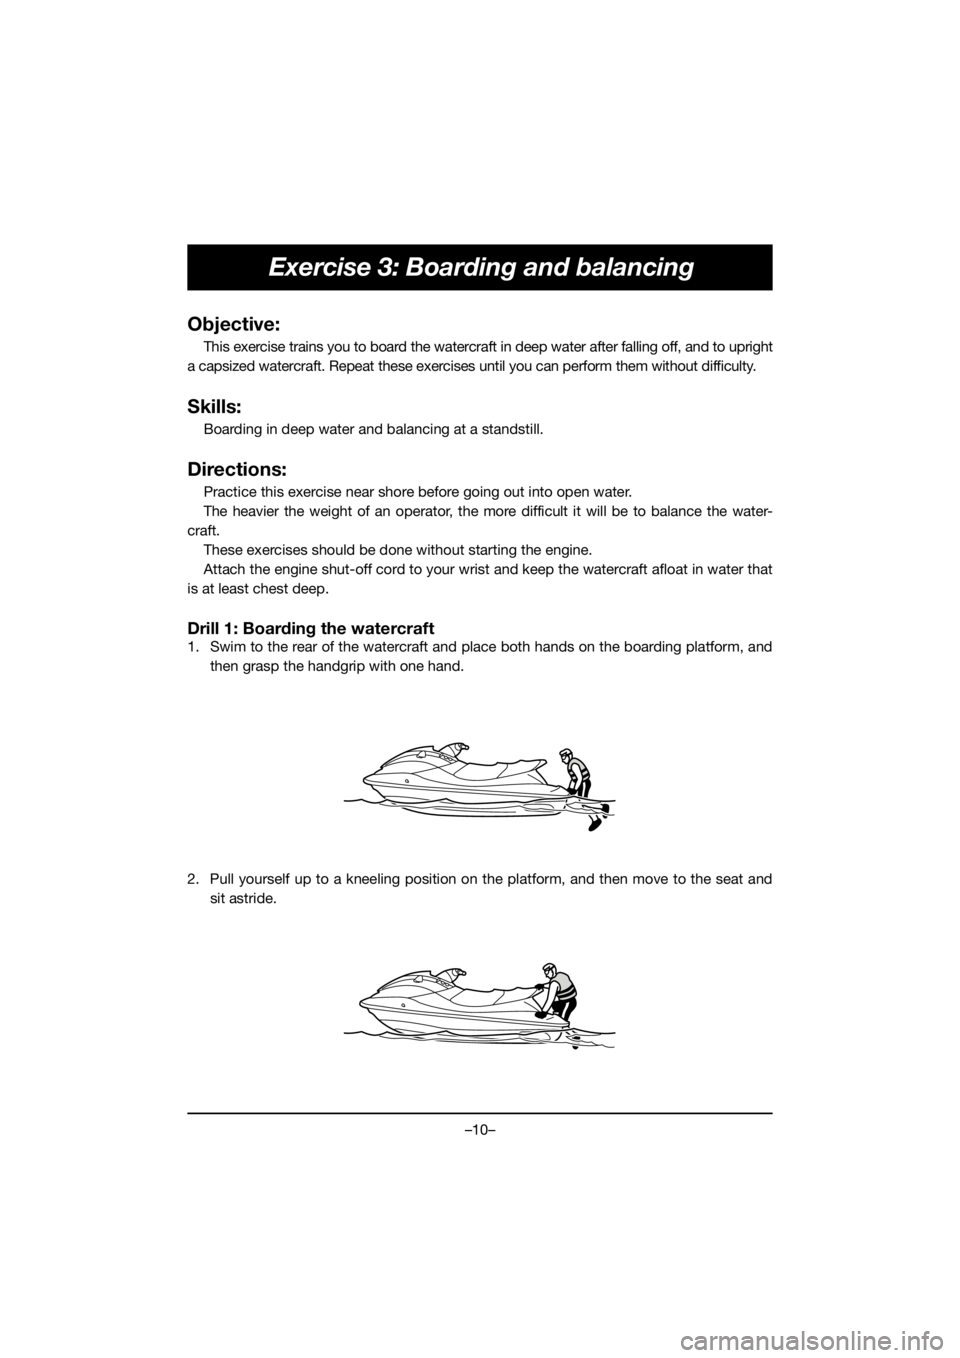 YAMAHA EX SPORT 2020 User Guide –10–
Exercise 3: Boarding and balancing
Objective:
This exercise trains you to board the watercraft in deep water after falling off, and to upright
a capsized watercraft. Repeat these exercises un